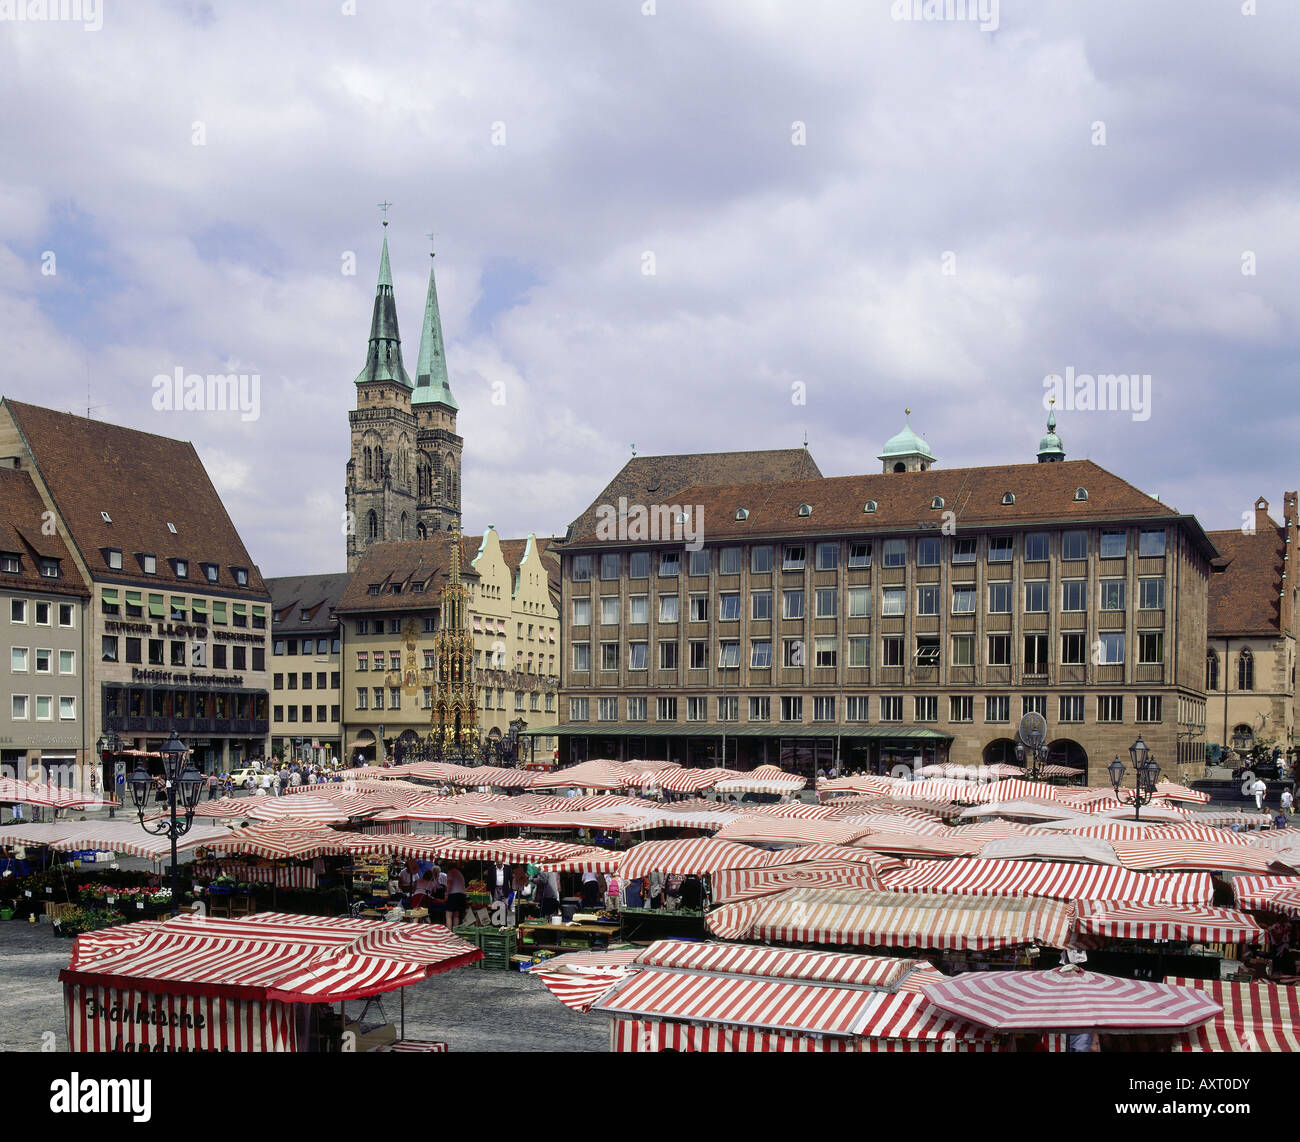 geography / travel, Germany, Bavaria, Nuremberg, old town hall, town hall square with market, huts, market stand, trade, selling, Stock Photo